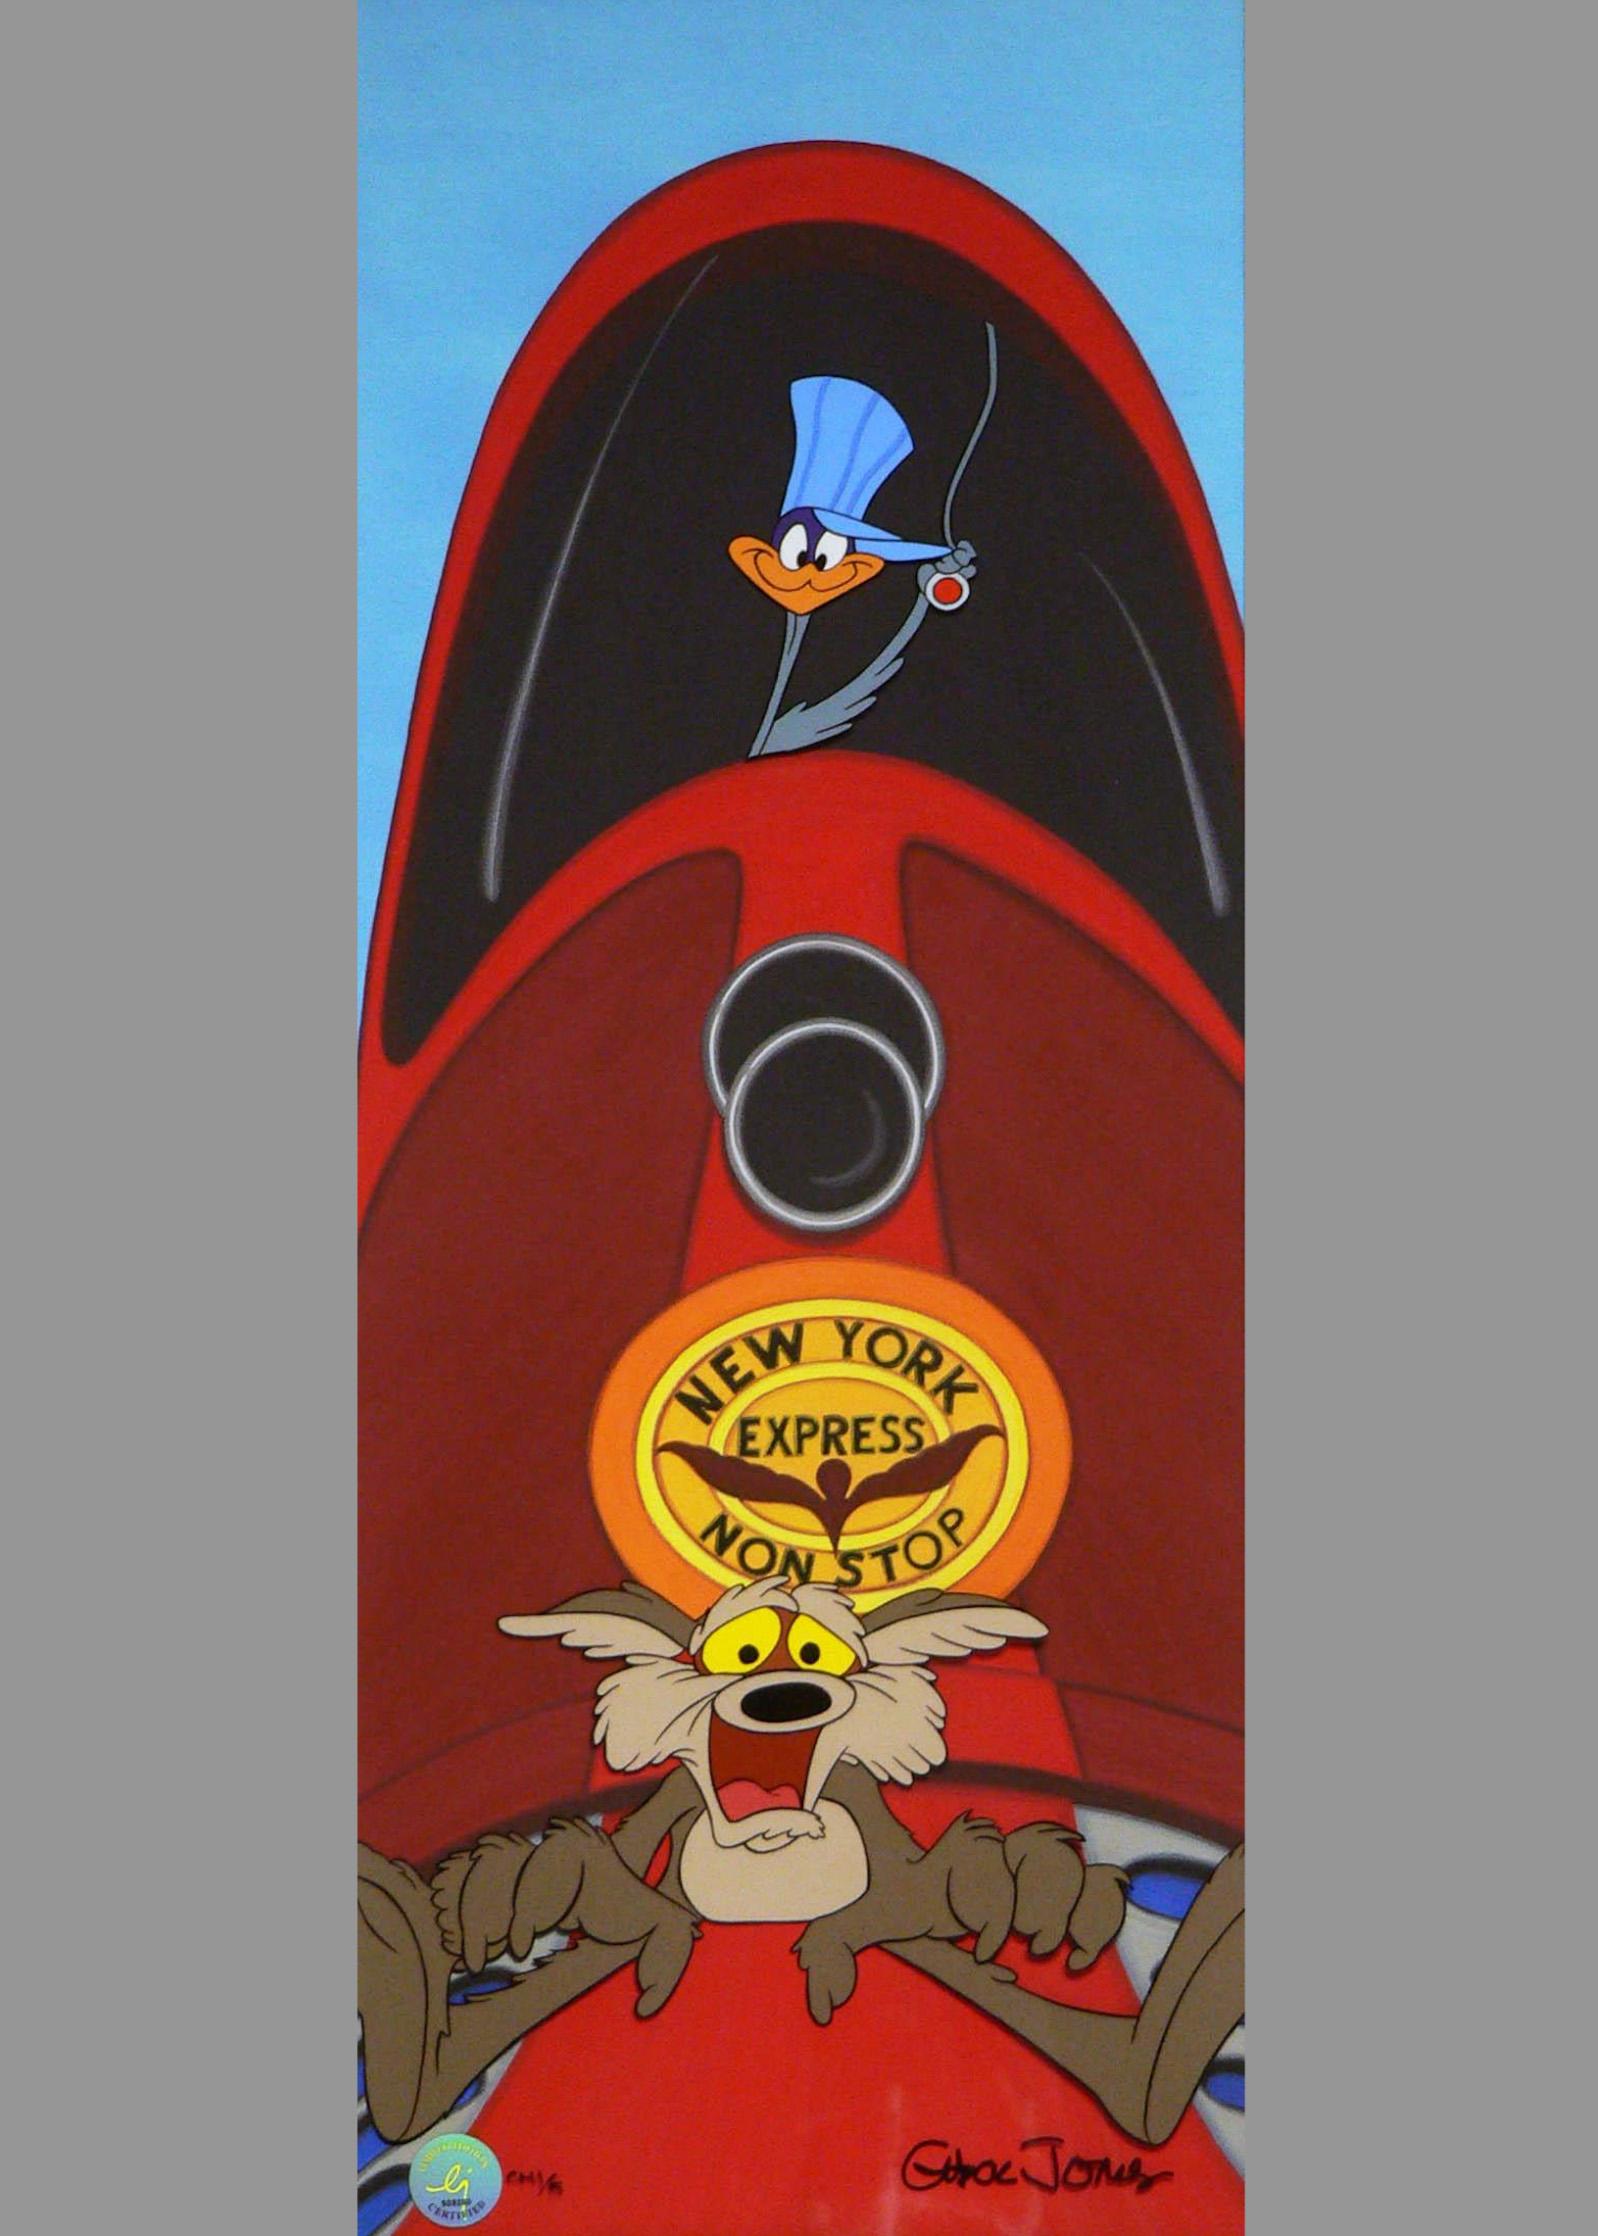 Zip and Snort: Wile Coyote + Road Runner Limited Edition Cel - Art by Chuck Jones